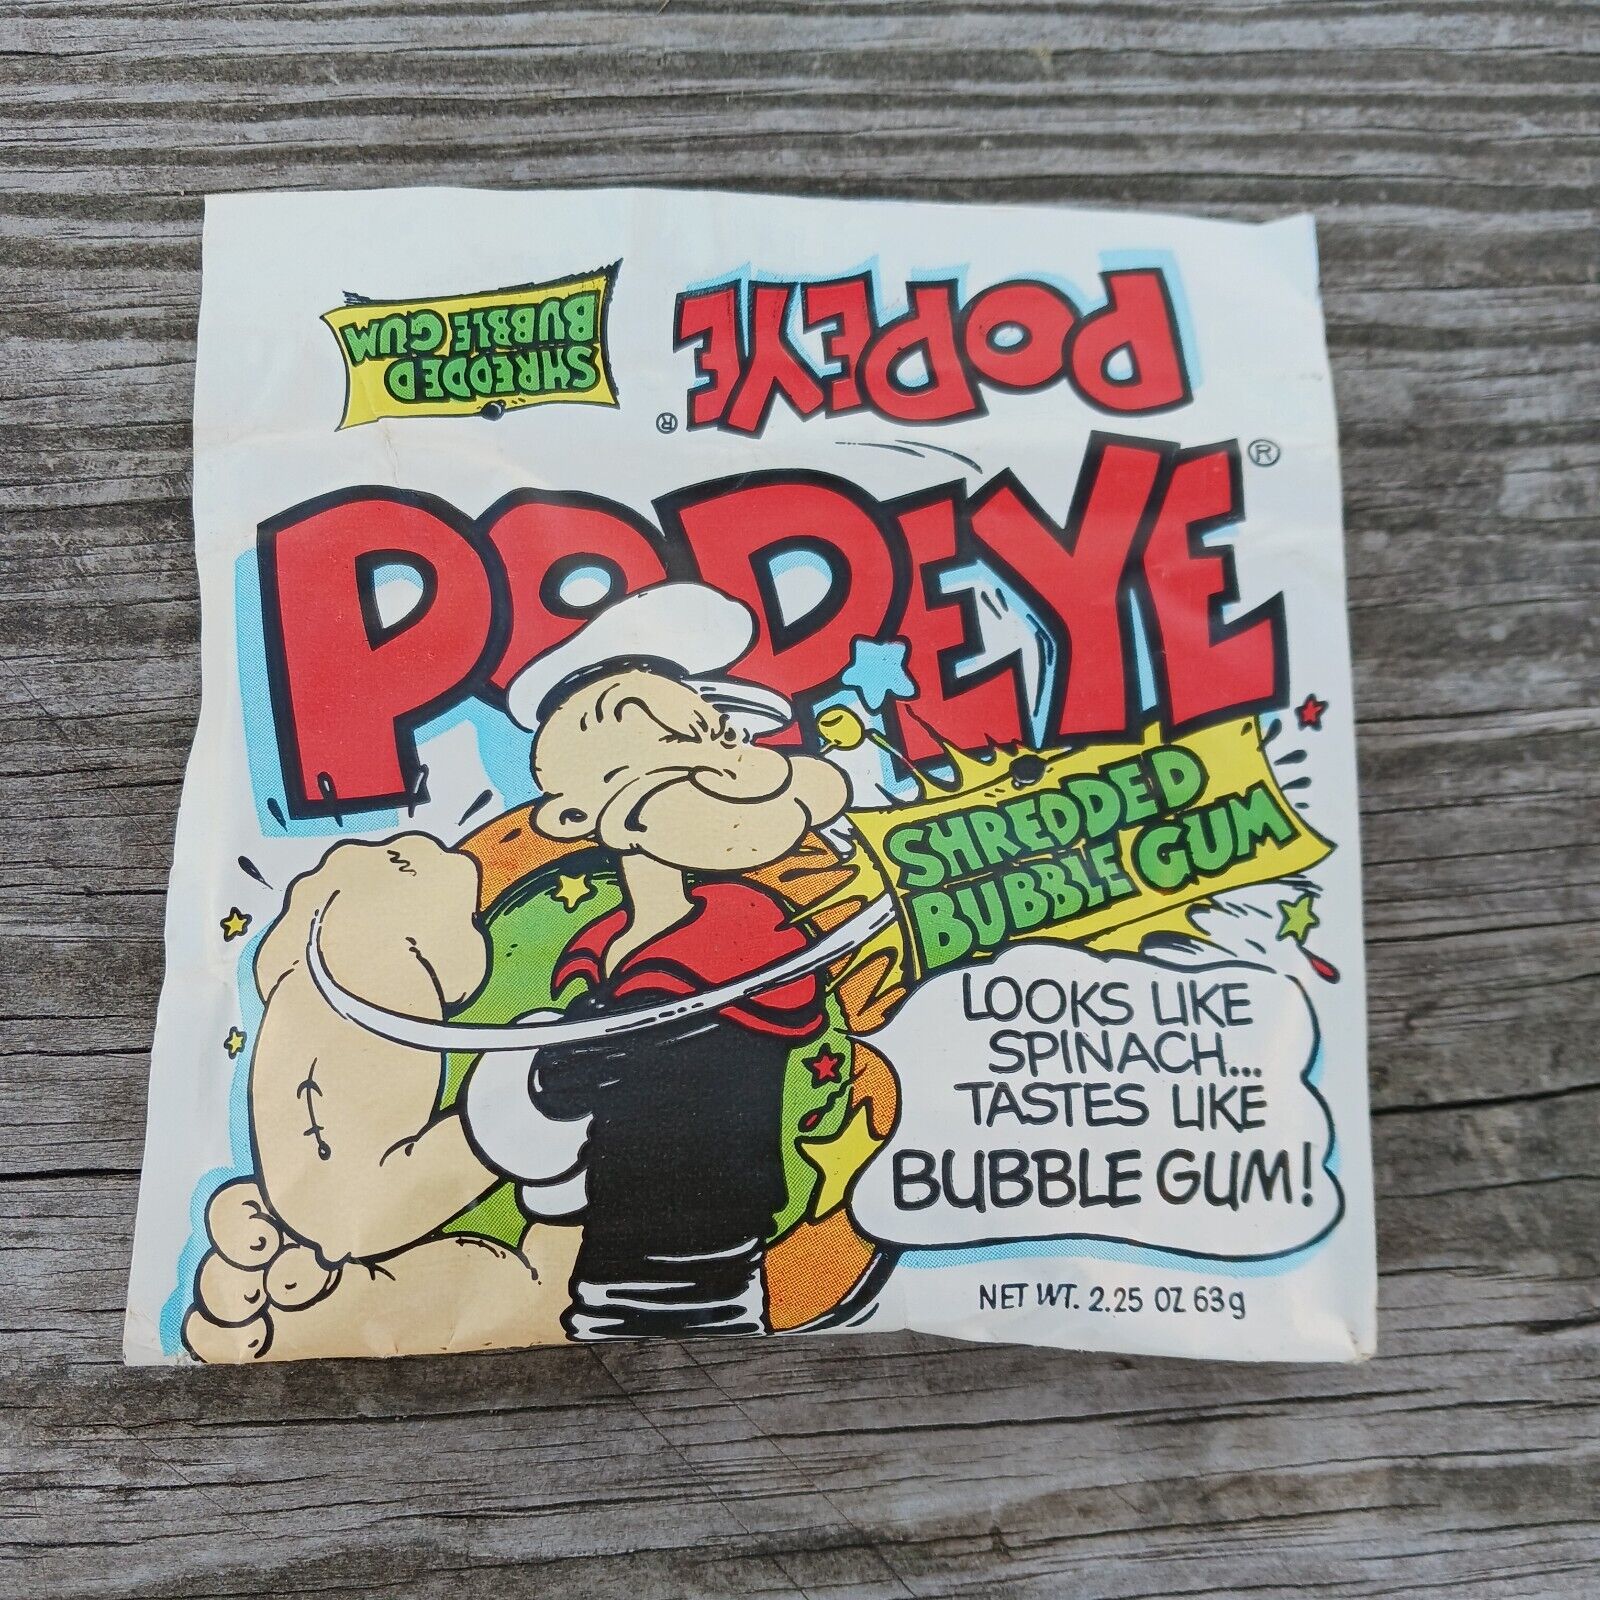 Vintage 1981 Popeye Spinach like Bubble Gum Comics 2.25 Oz Unopened